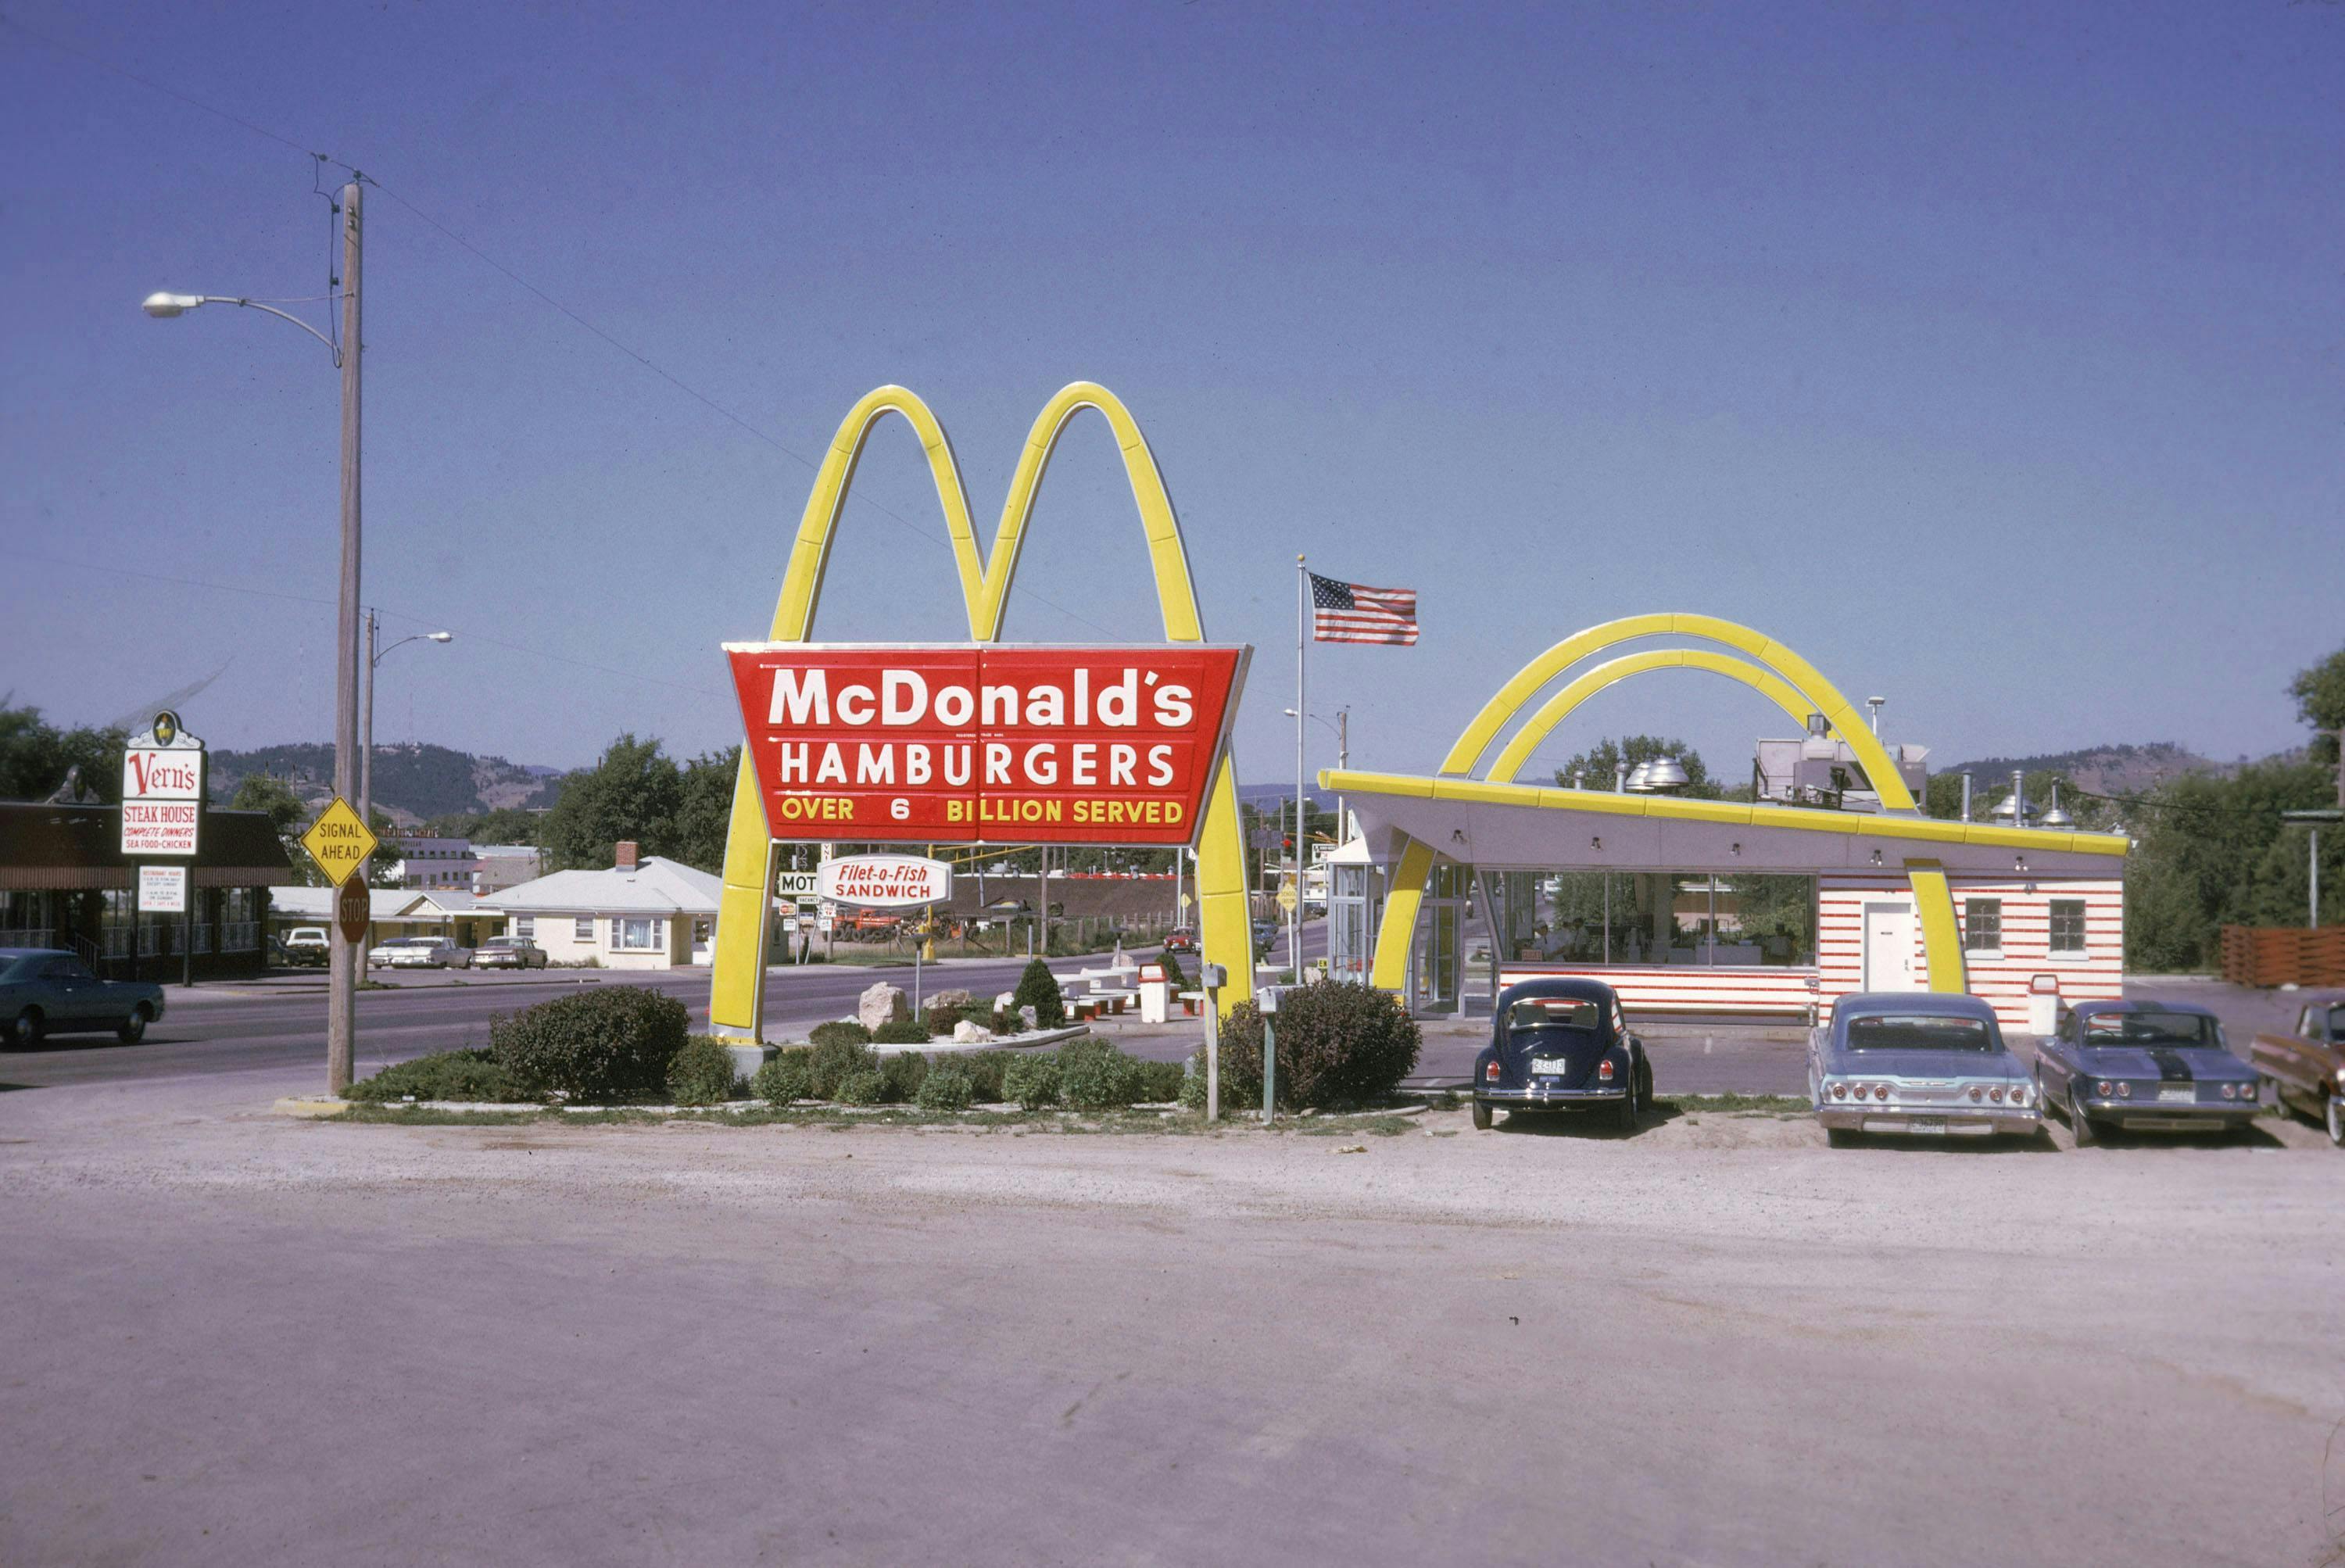 american culture t478325 t473825 sign road restaurant photograph food & drink flag eating out colour car brand name (ex gins 2407837) transportation vehicle automobile symbol tarmac asphalt